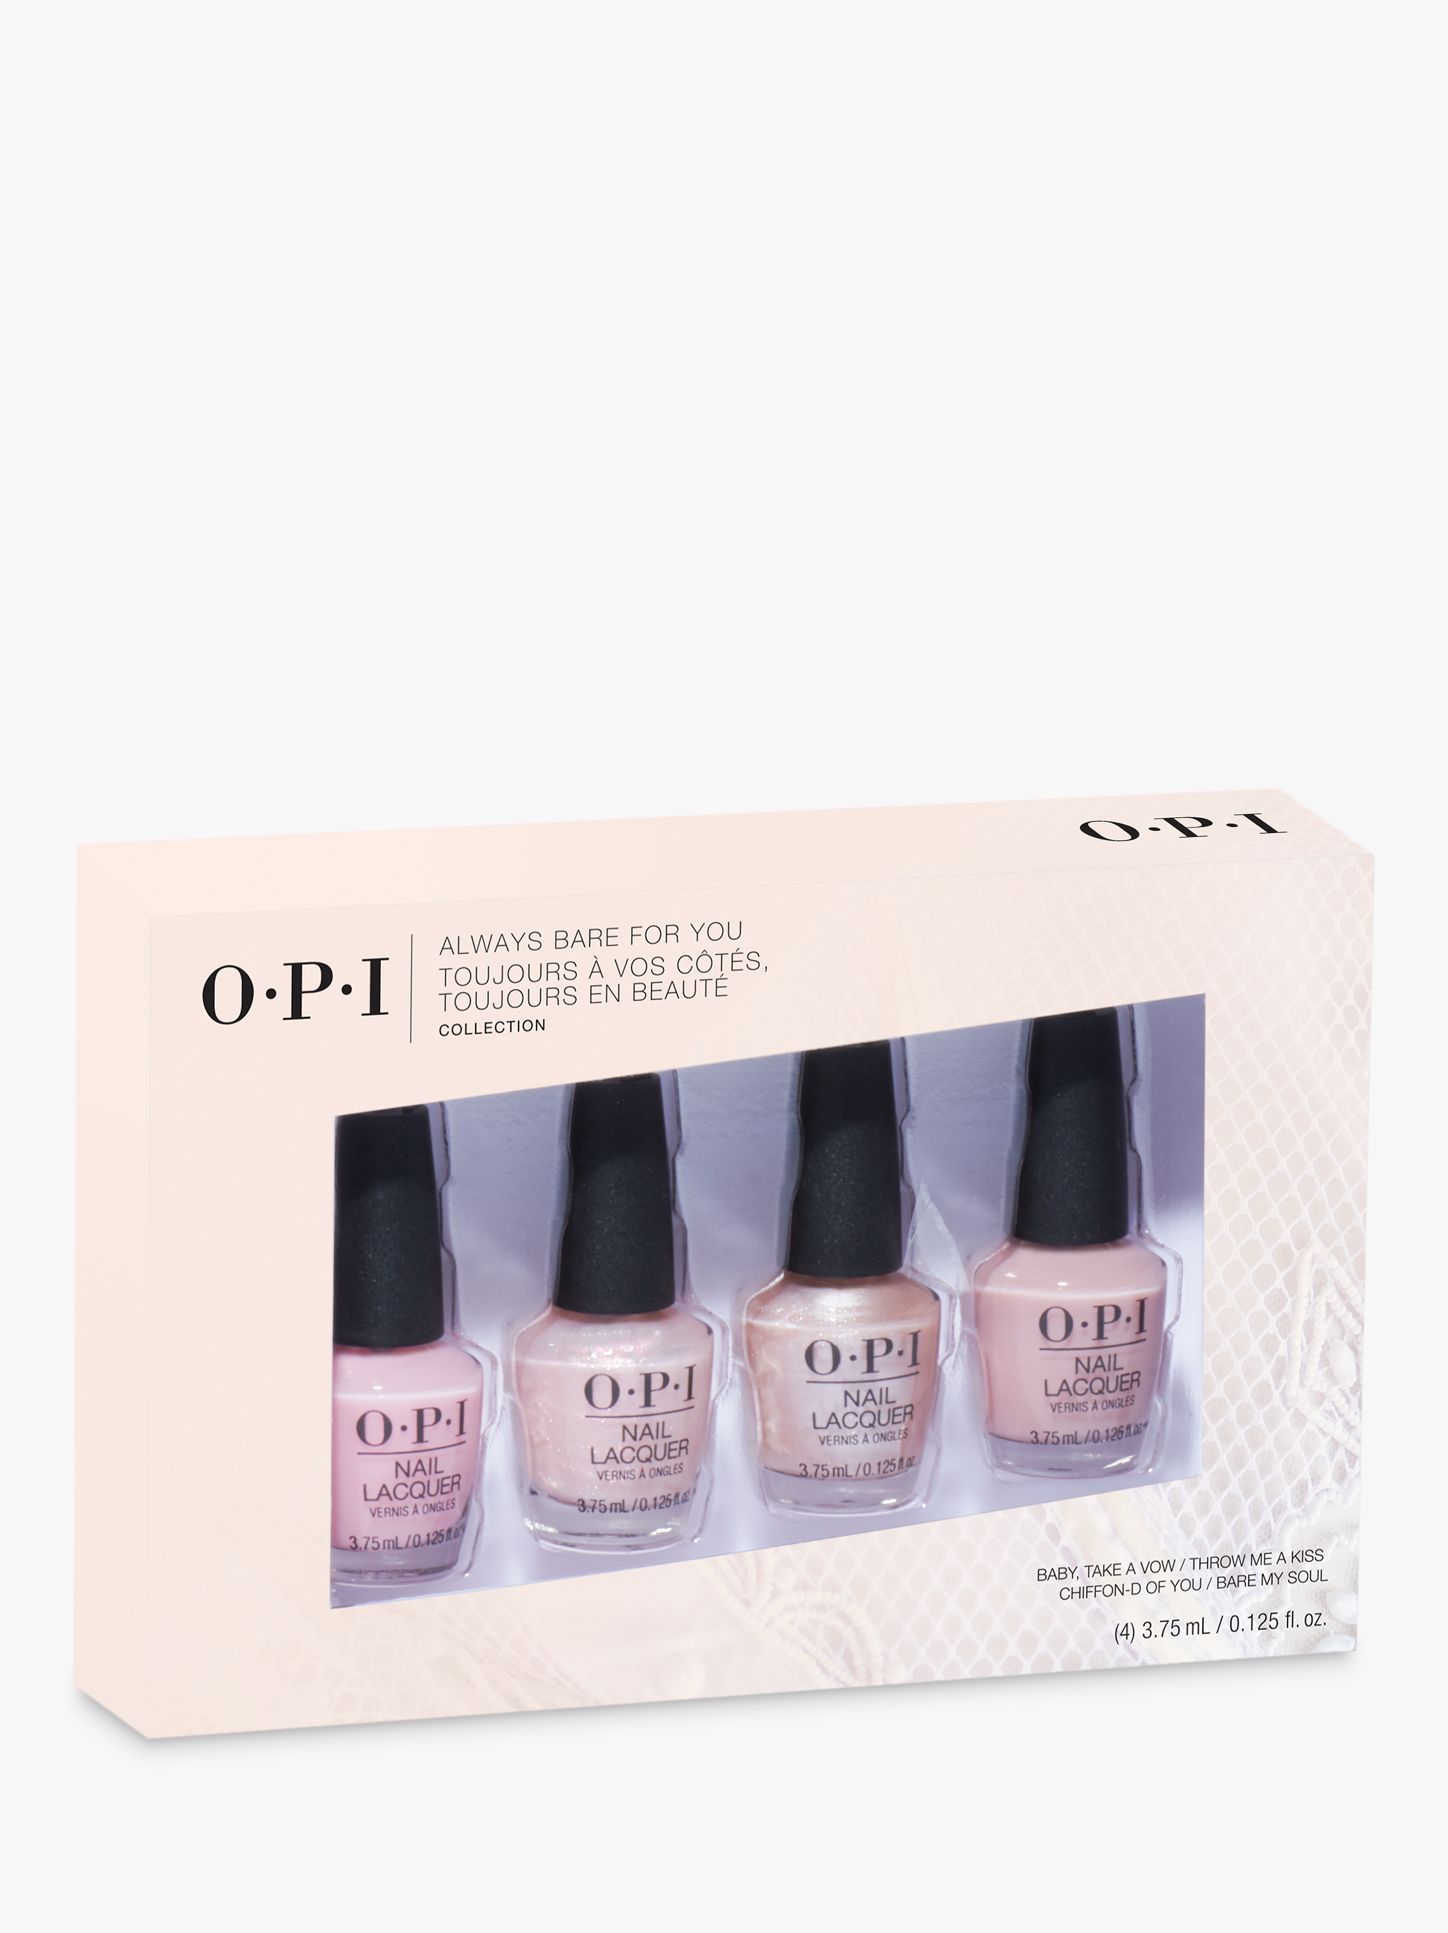 Loreal Nail Polish Set opi nail lacquer always bare for you collection mini 4 pack